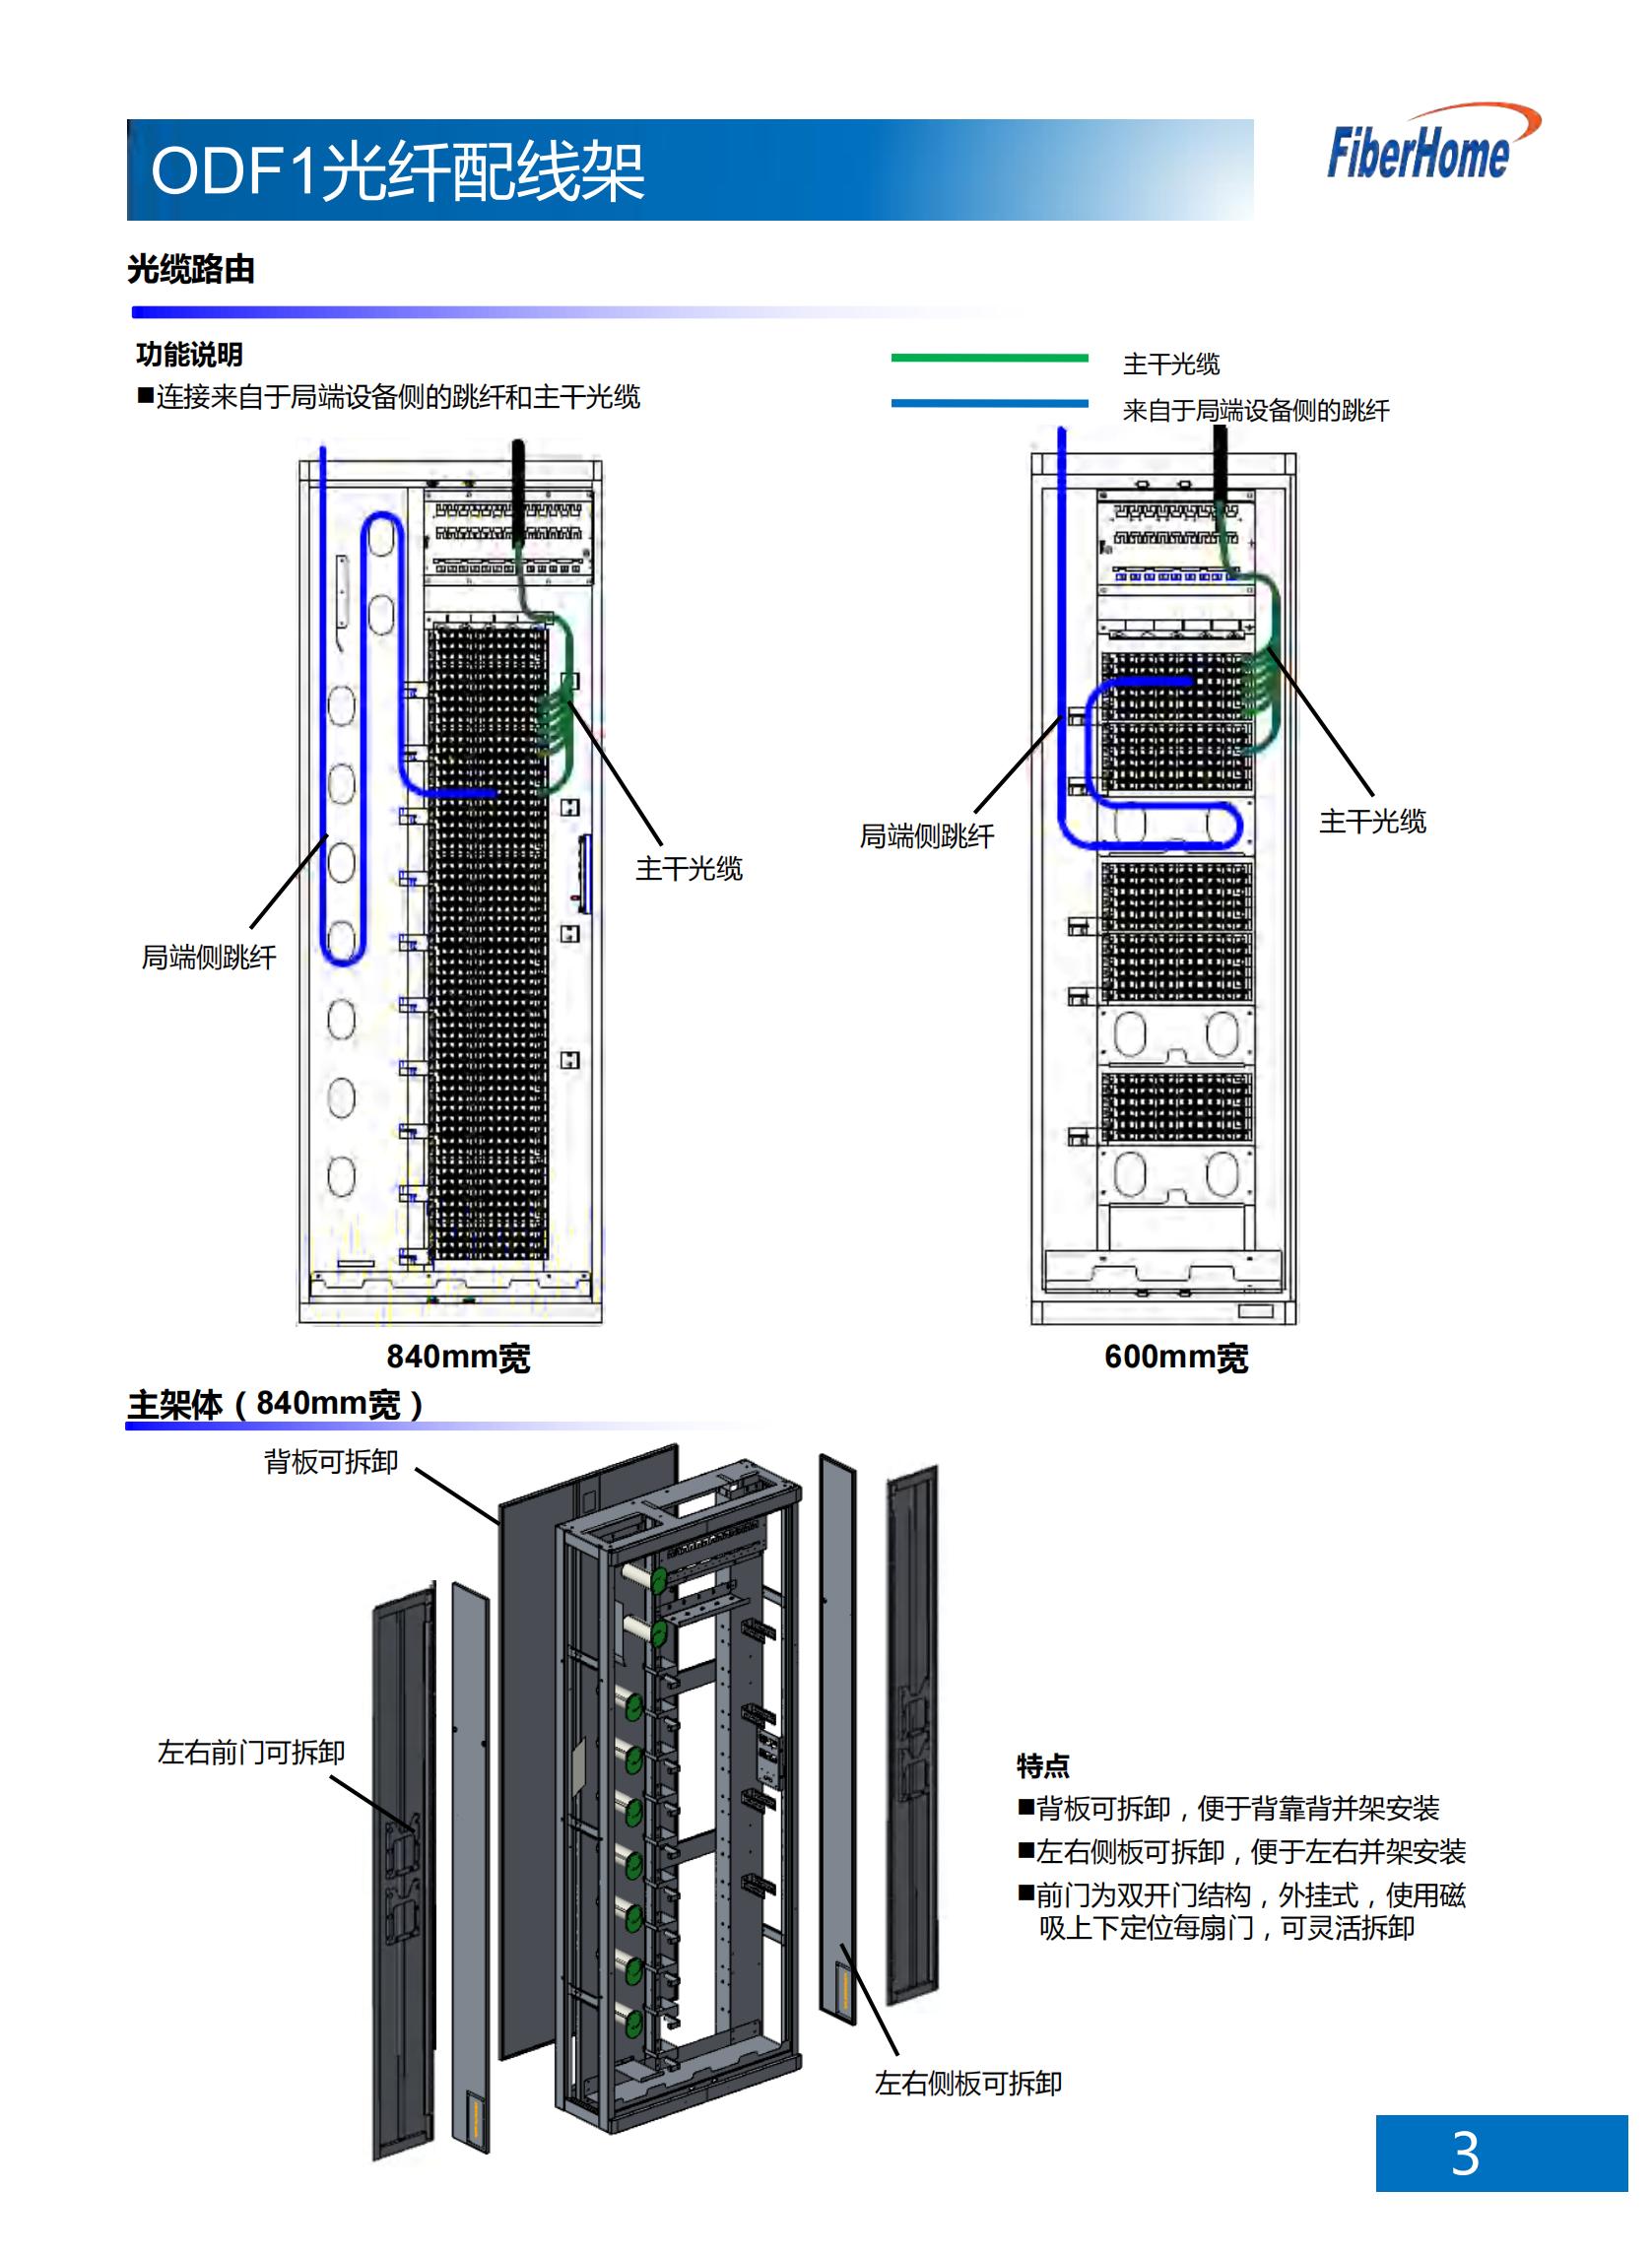 ODF101-144-A7-FC ODF optical fiber distribution frame (144-core wall-hanging all include 12-core FC fusion integration unit)